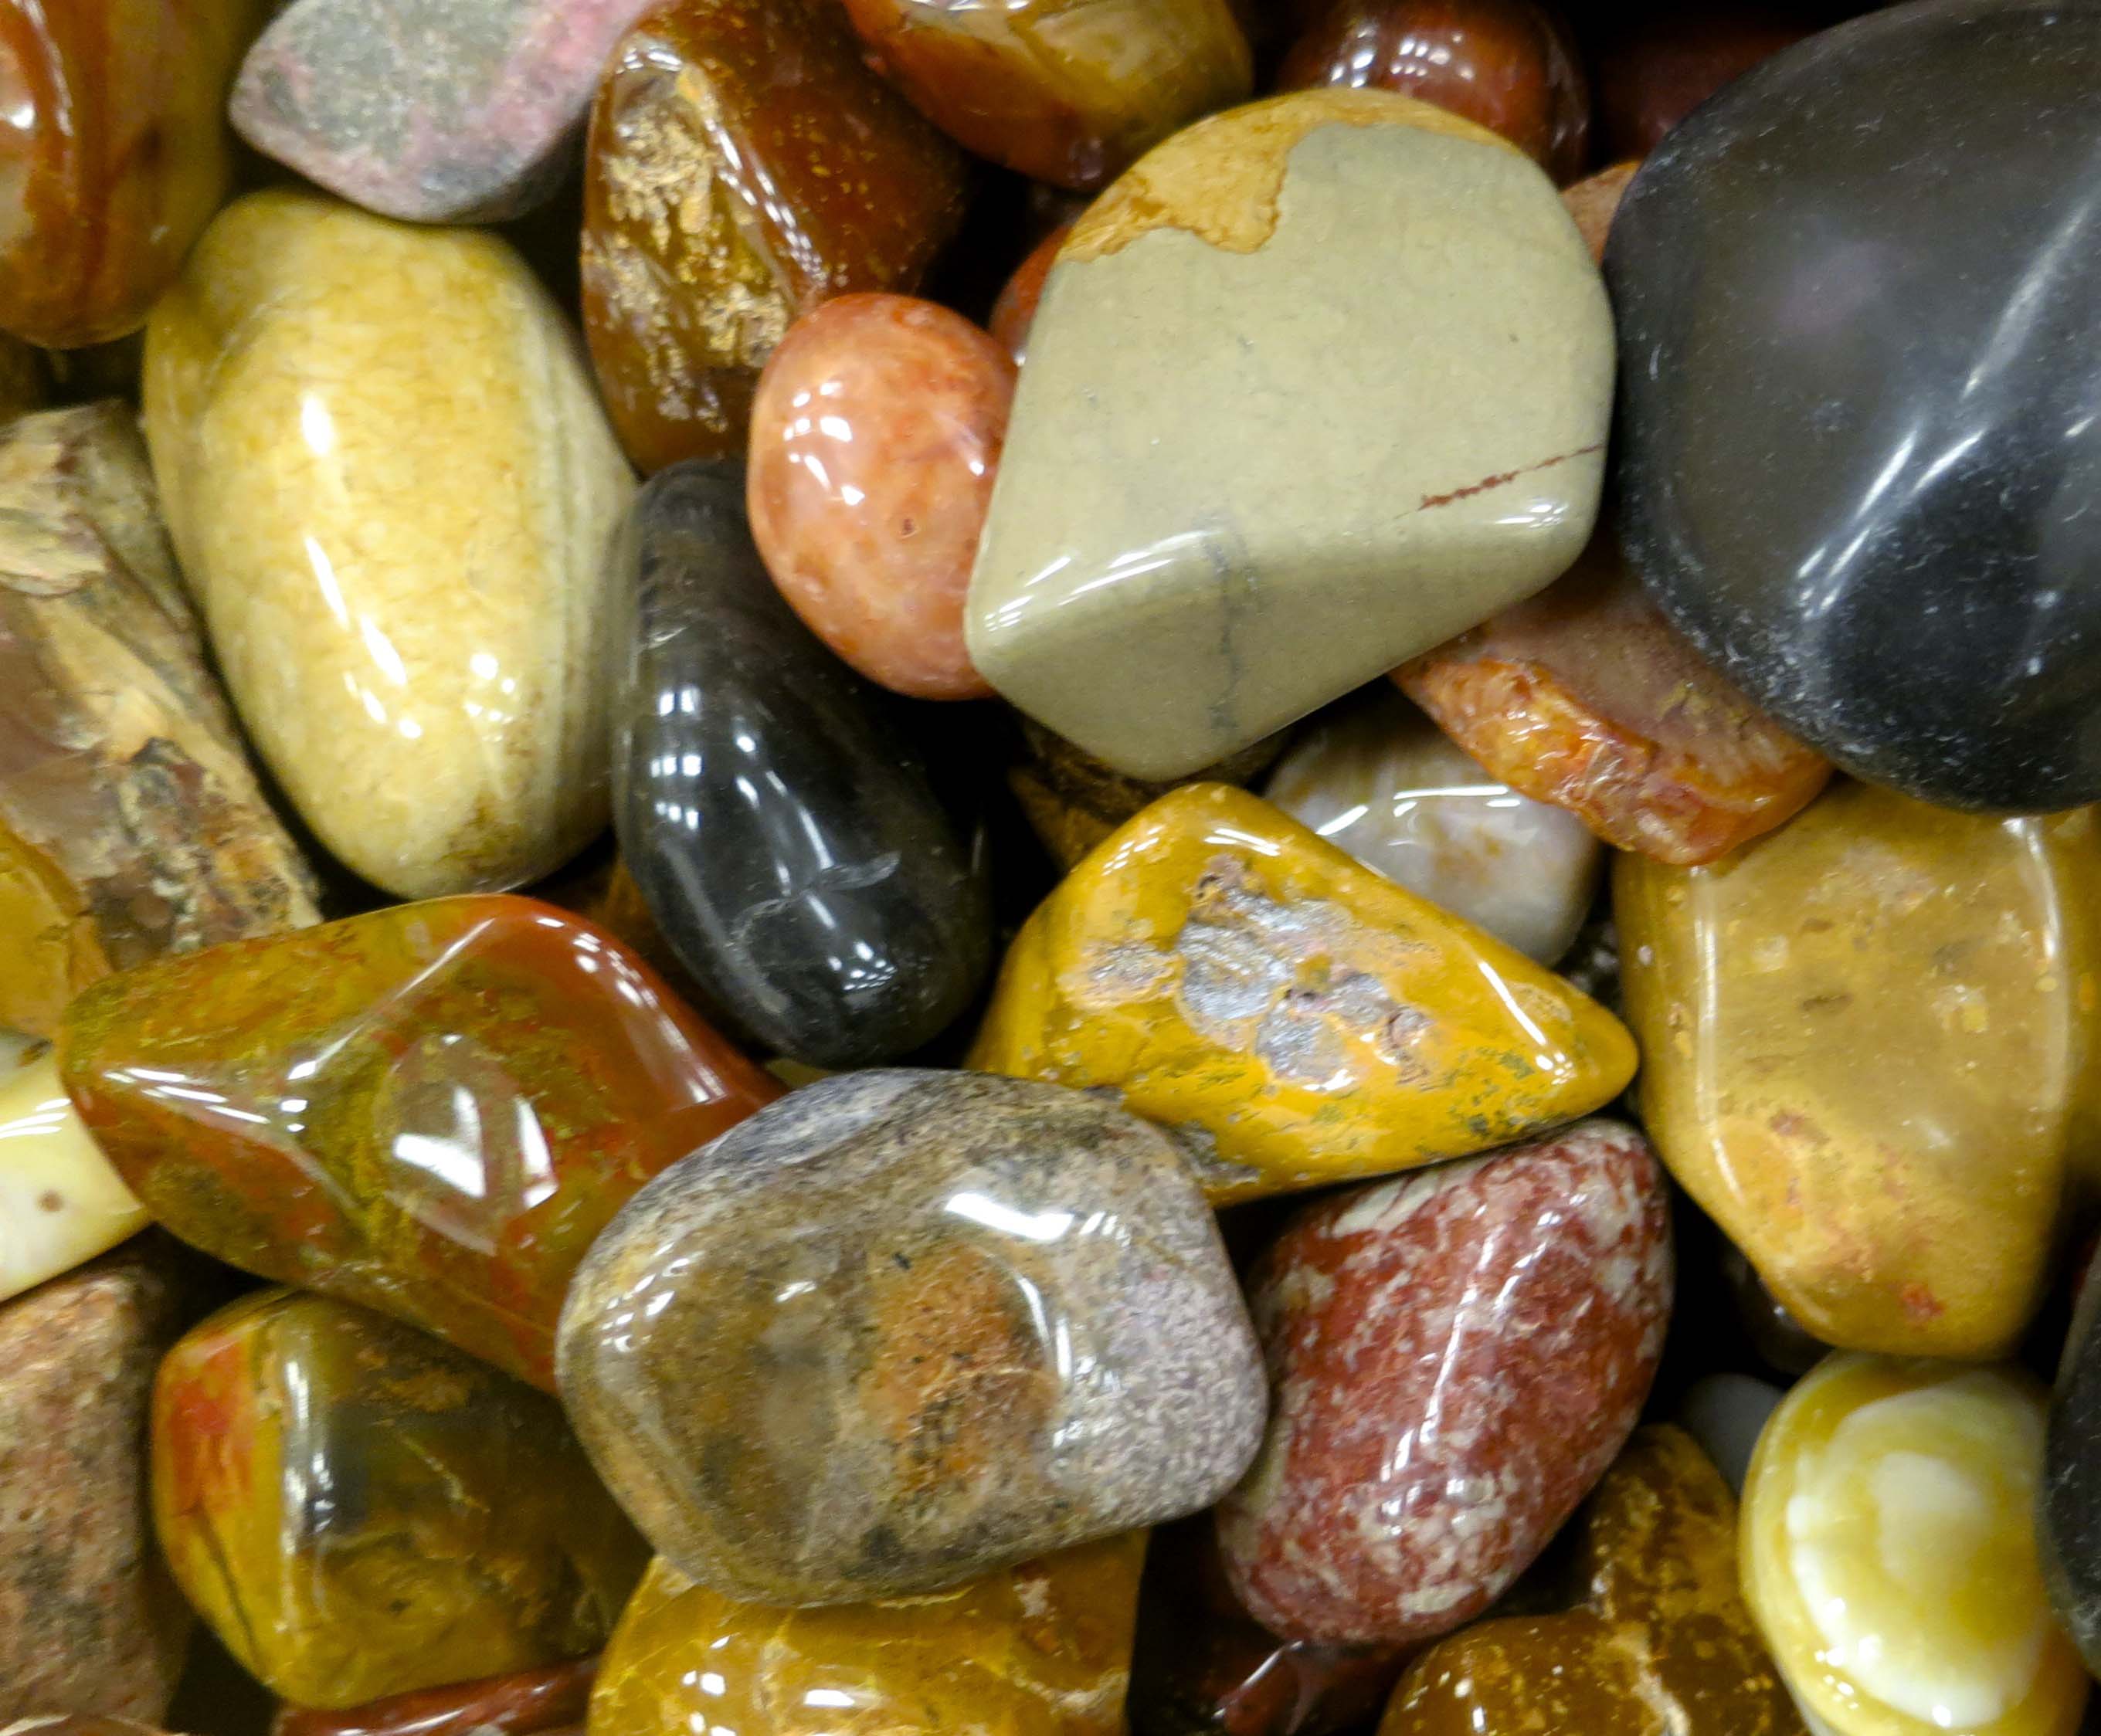 Polished agates at the Crater Rock Museum in Central Point, Oregon. Photo by Curtis Mekemson.